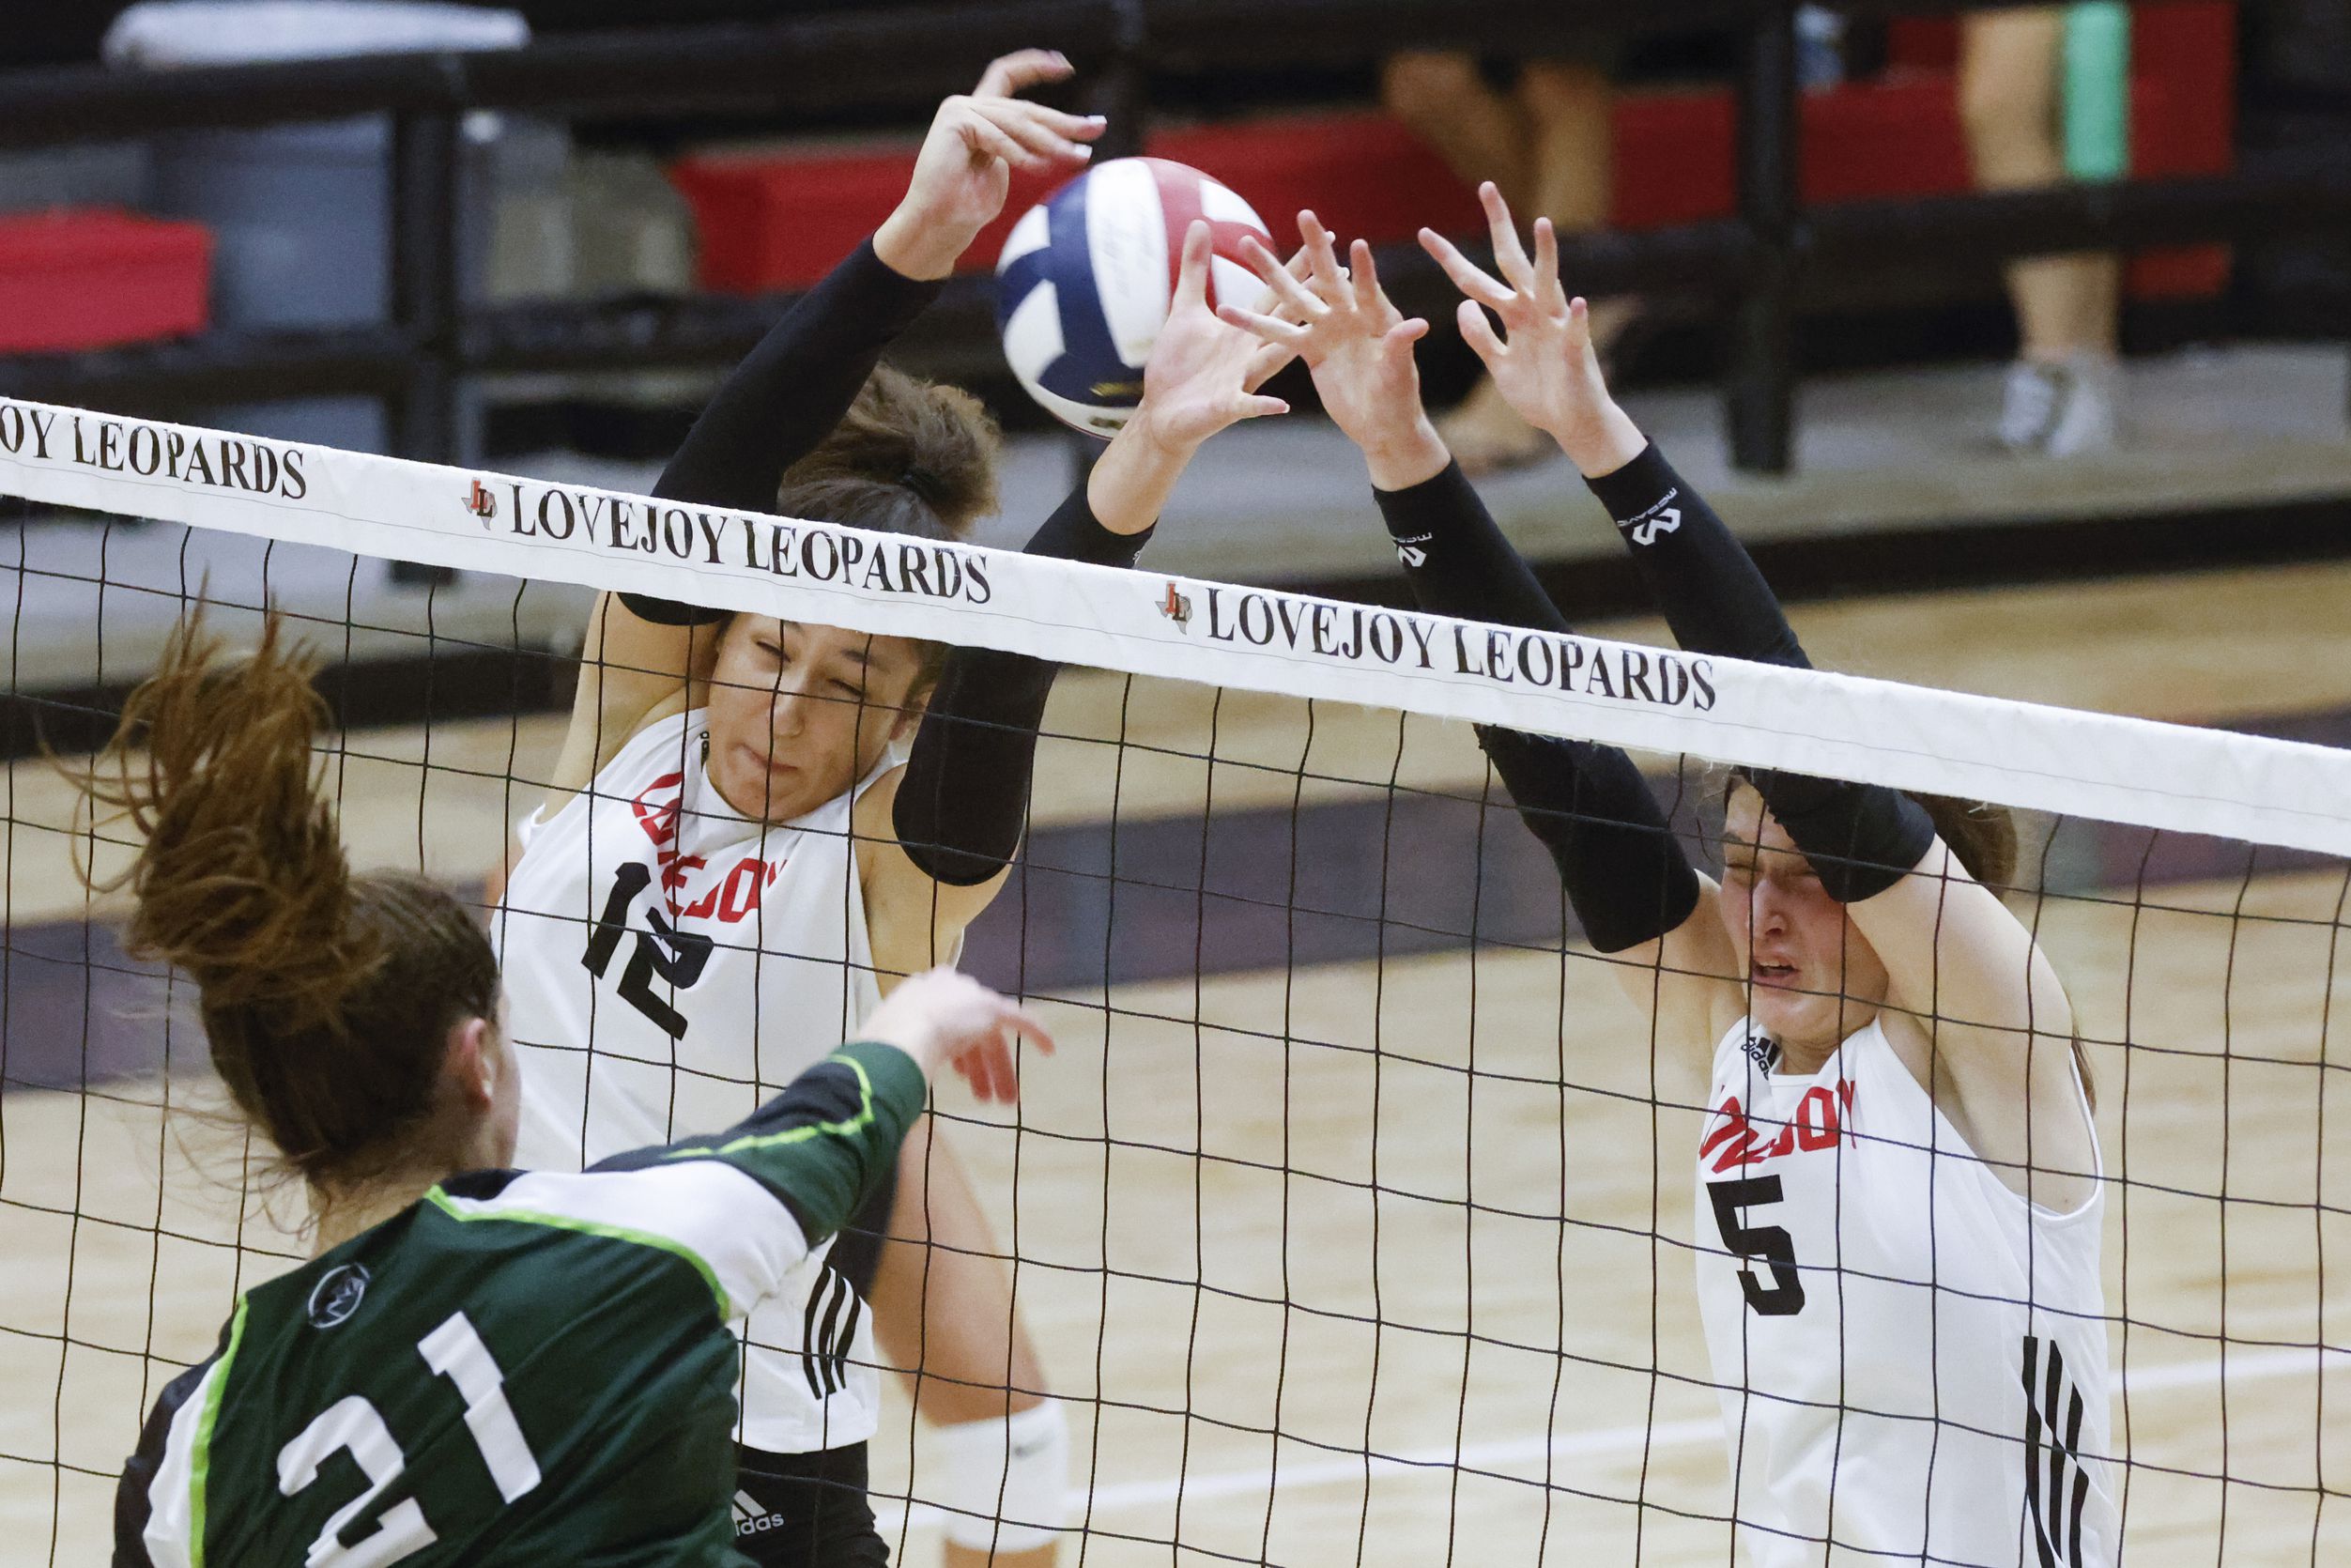 Photos: Prosper and Lovejoy compete in season-opening volleyball match